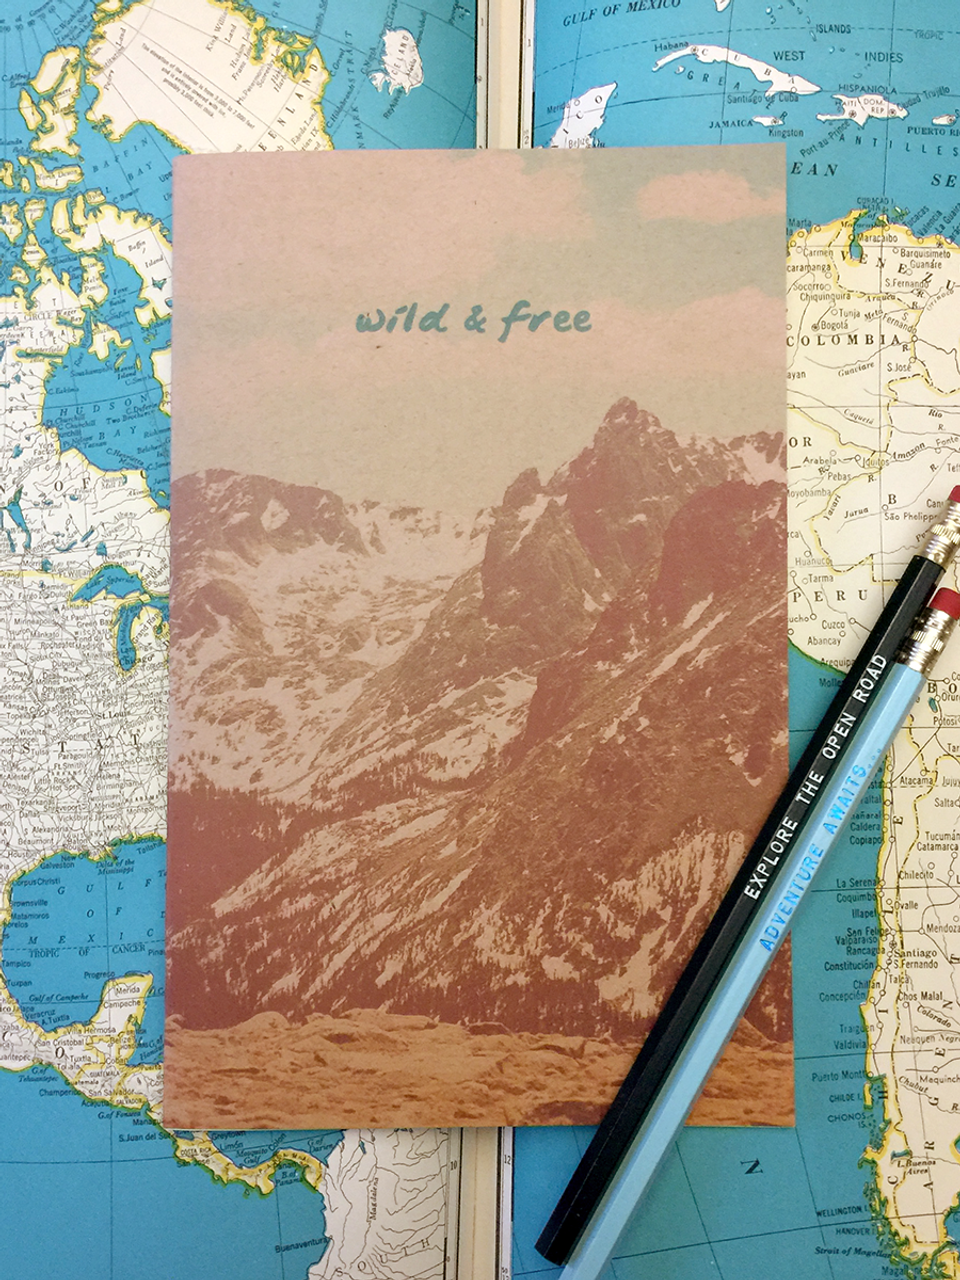 Travel The World: Travel Journal | 110 Pages | 5.5 x 8.5